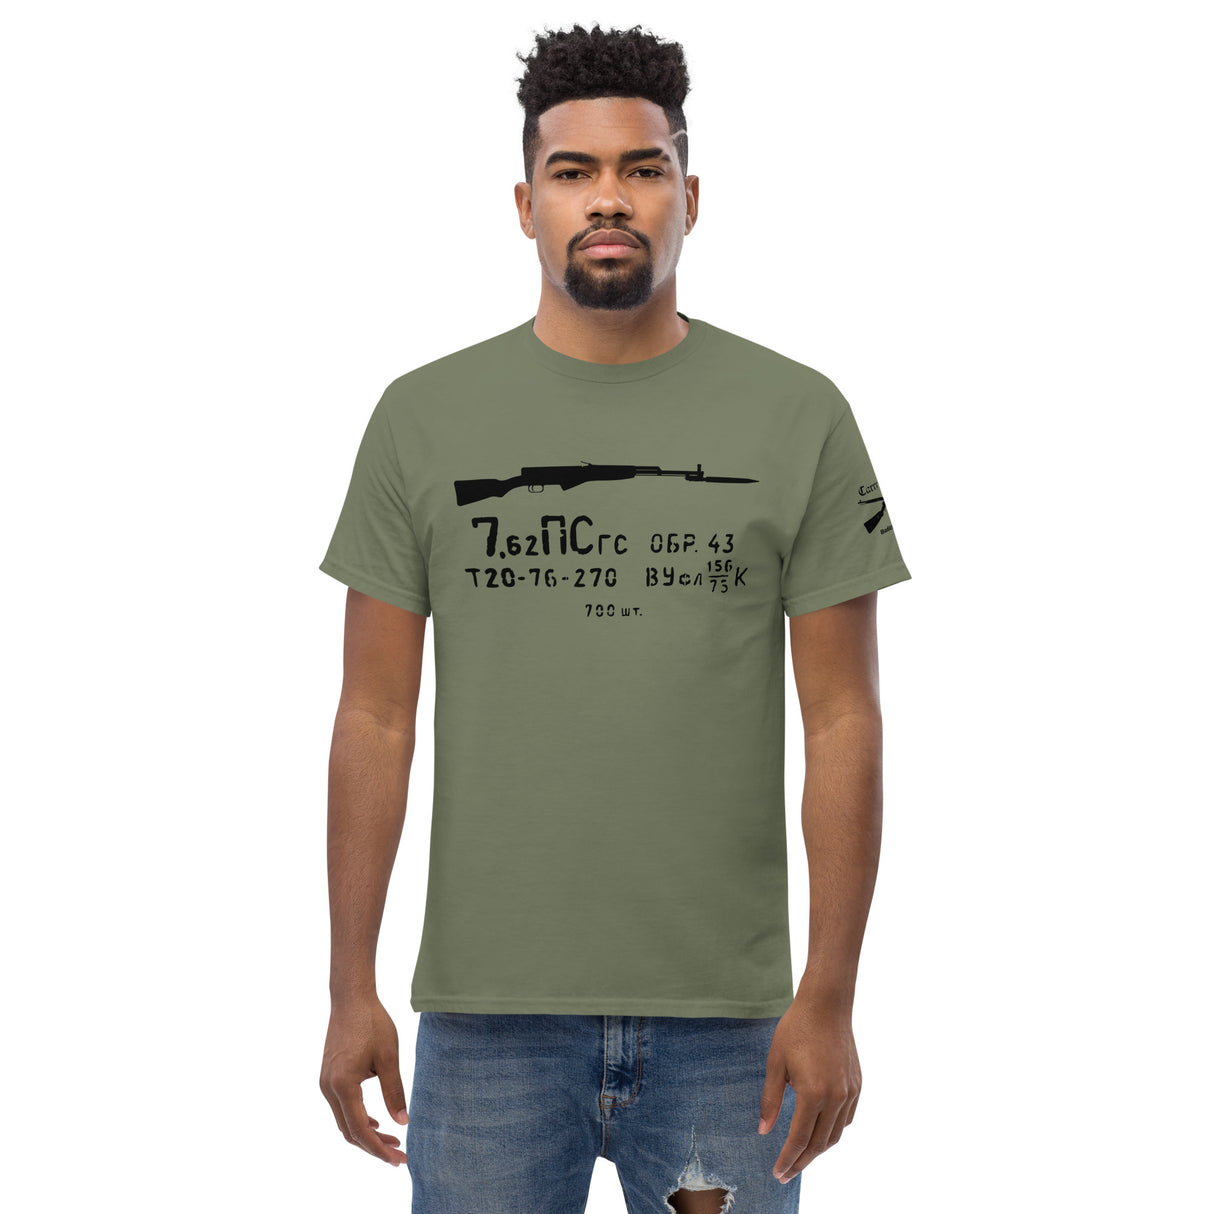 SKS carbine T-shirt with ammo spam can label prints - dark font